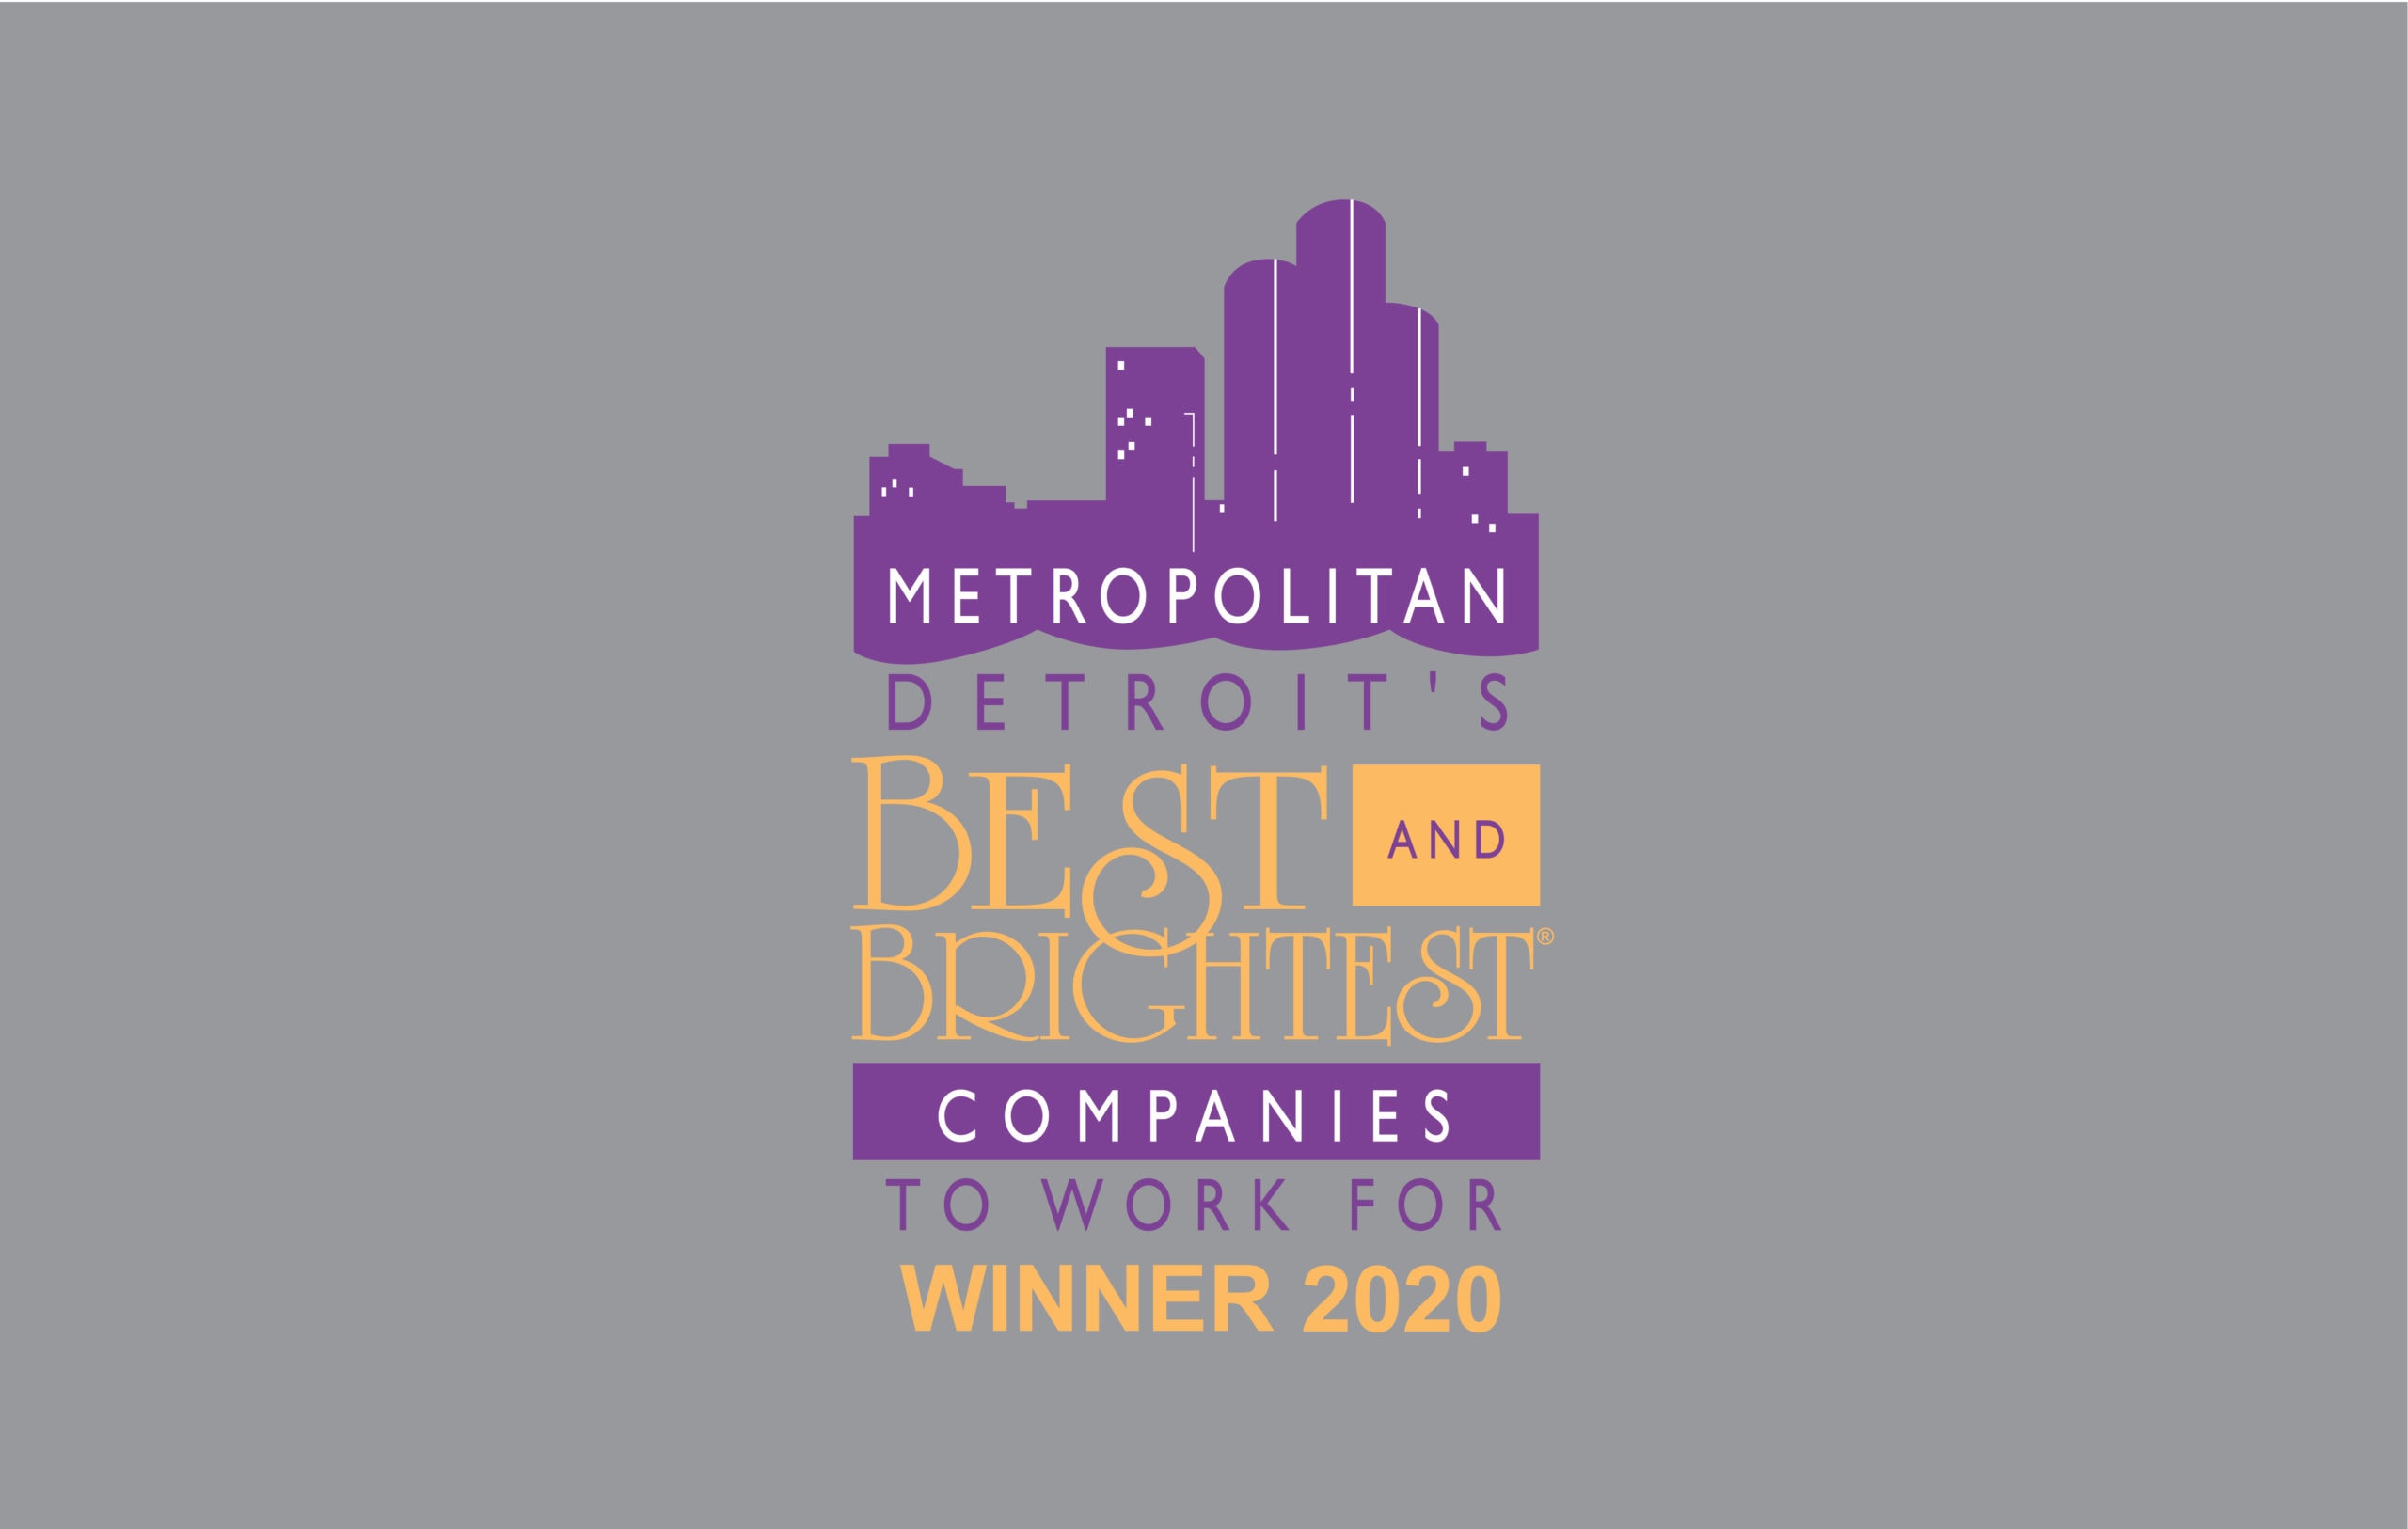 KIRCO Named a 2020 Metro Detroit’s Best and Brightest Companies to Work For Winner